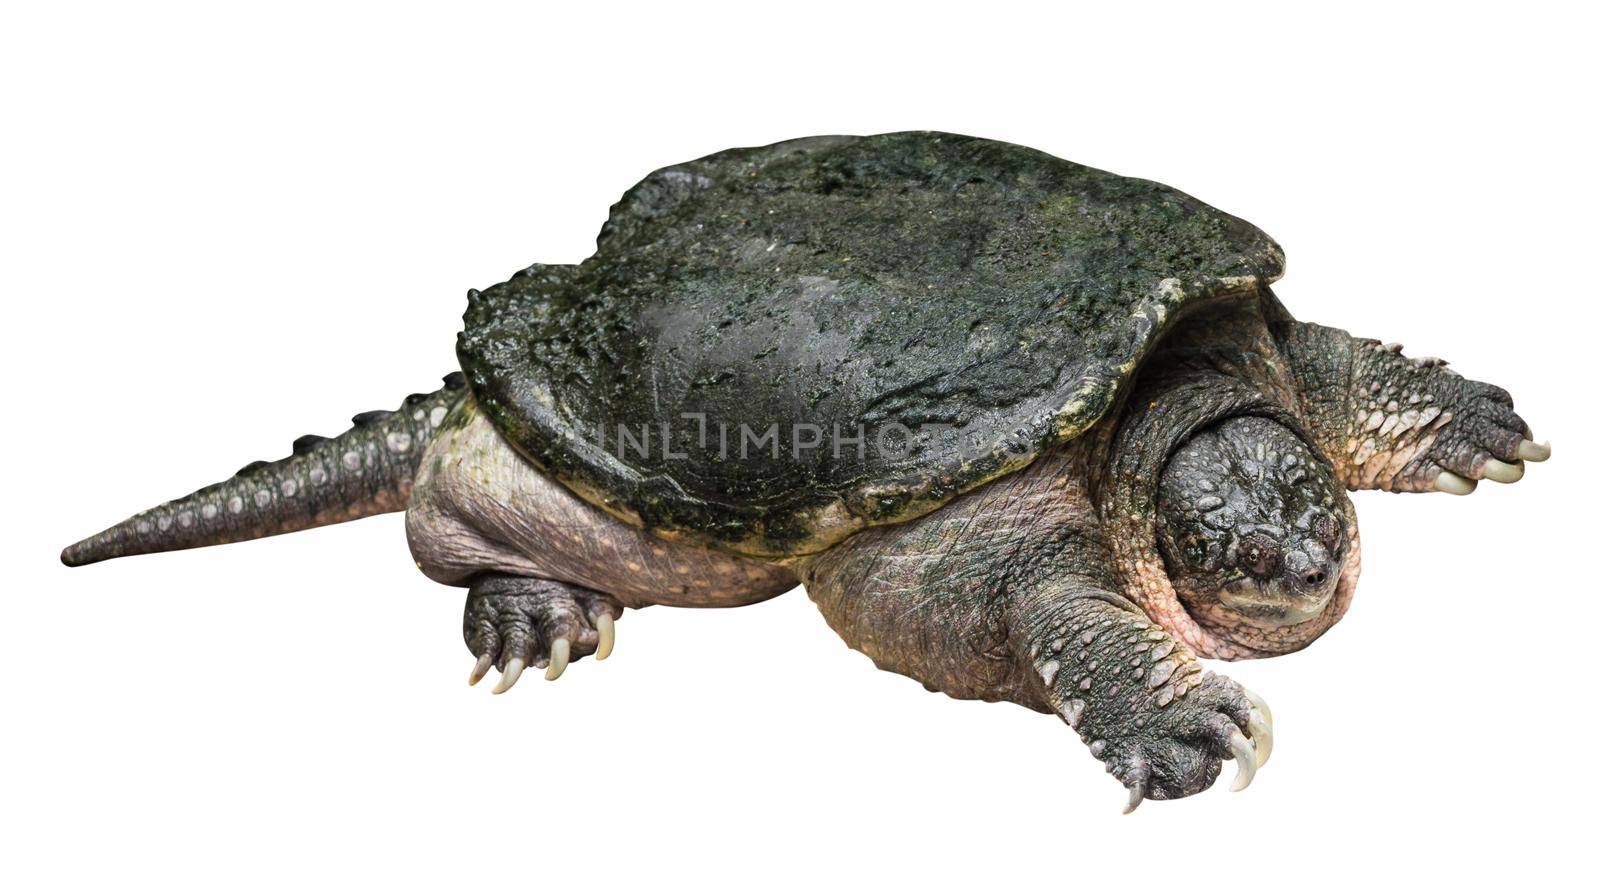 Snapping turtle ( Chelydra serpentina ) is creeping and raise one's head on white isolated background . Side view .